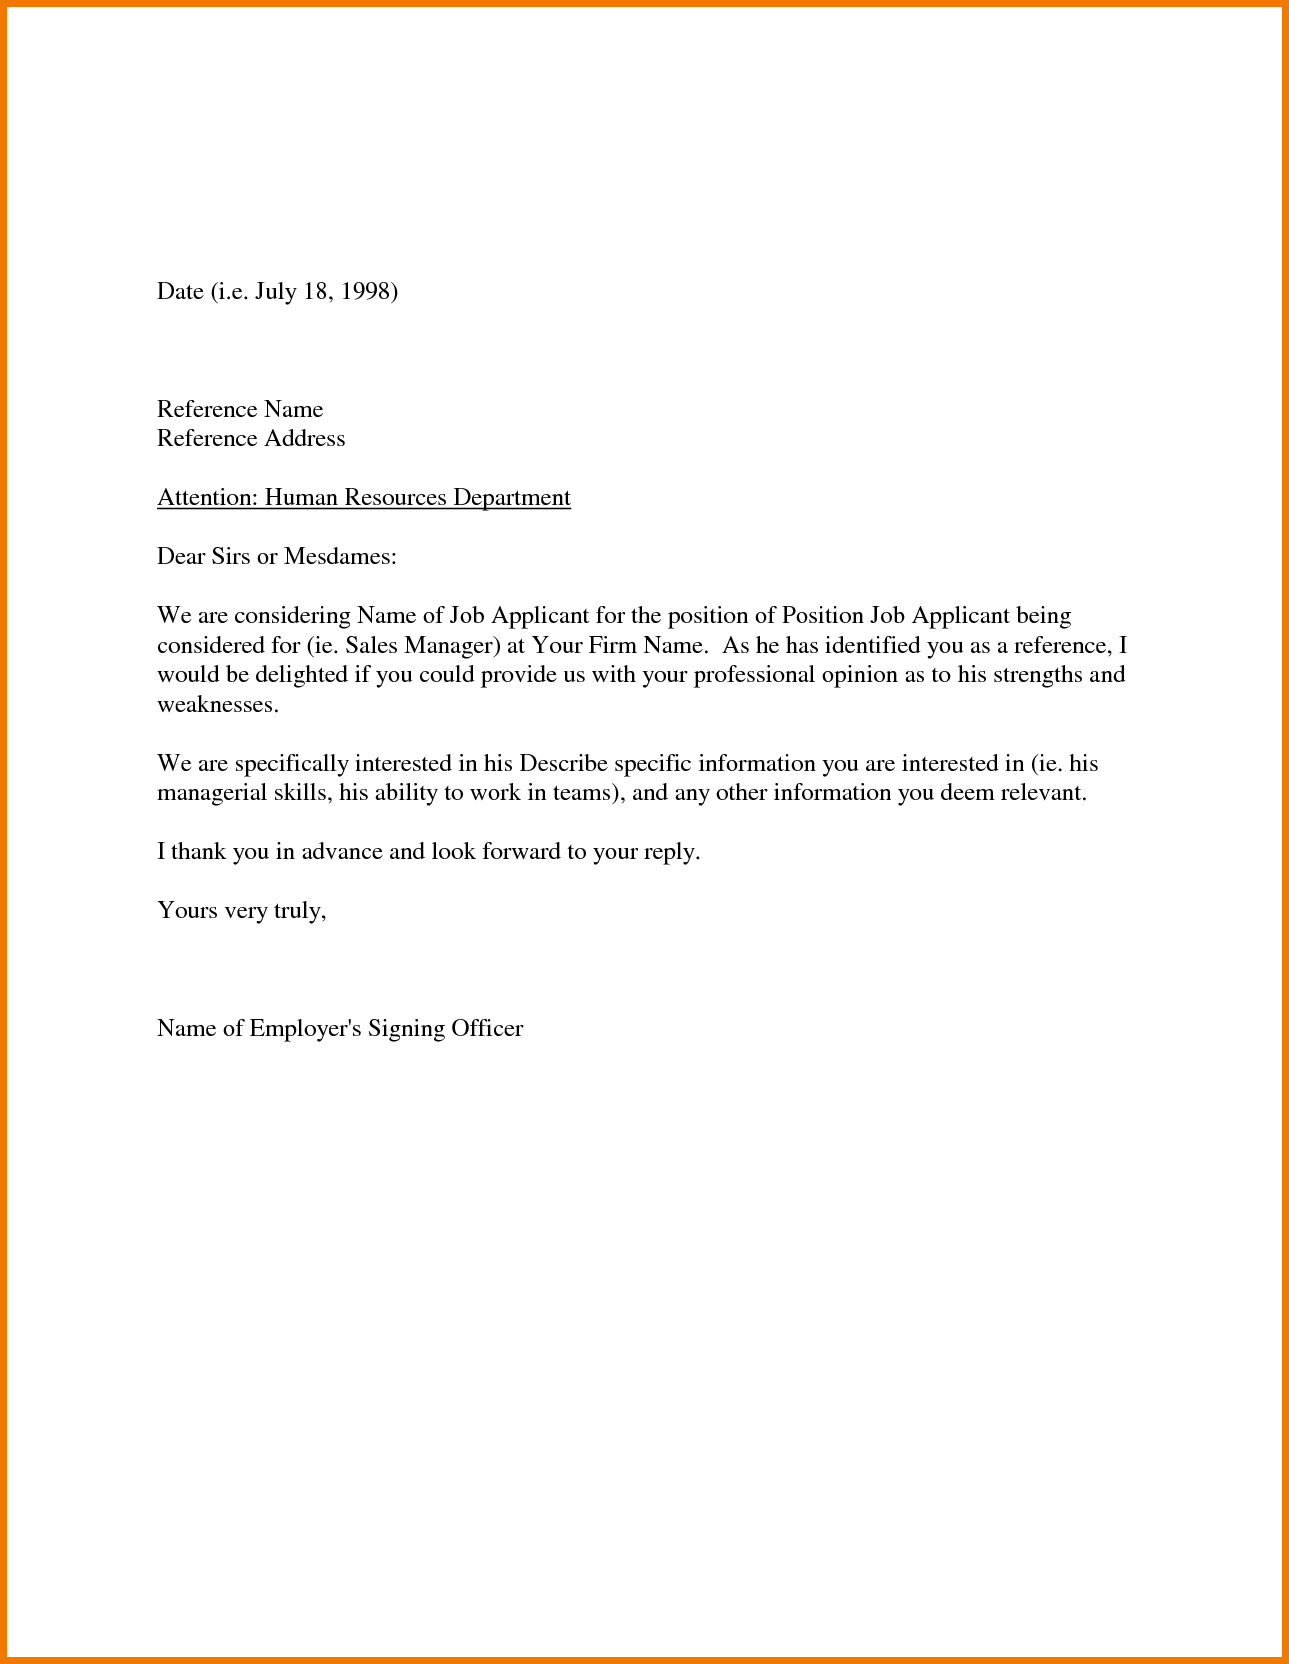 Example of job letter from employer